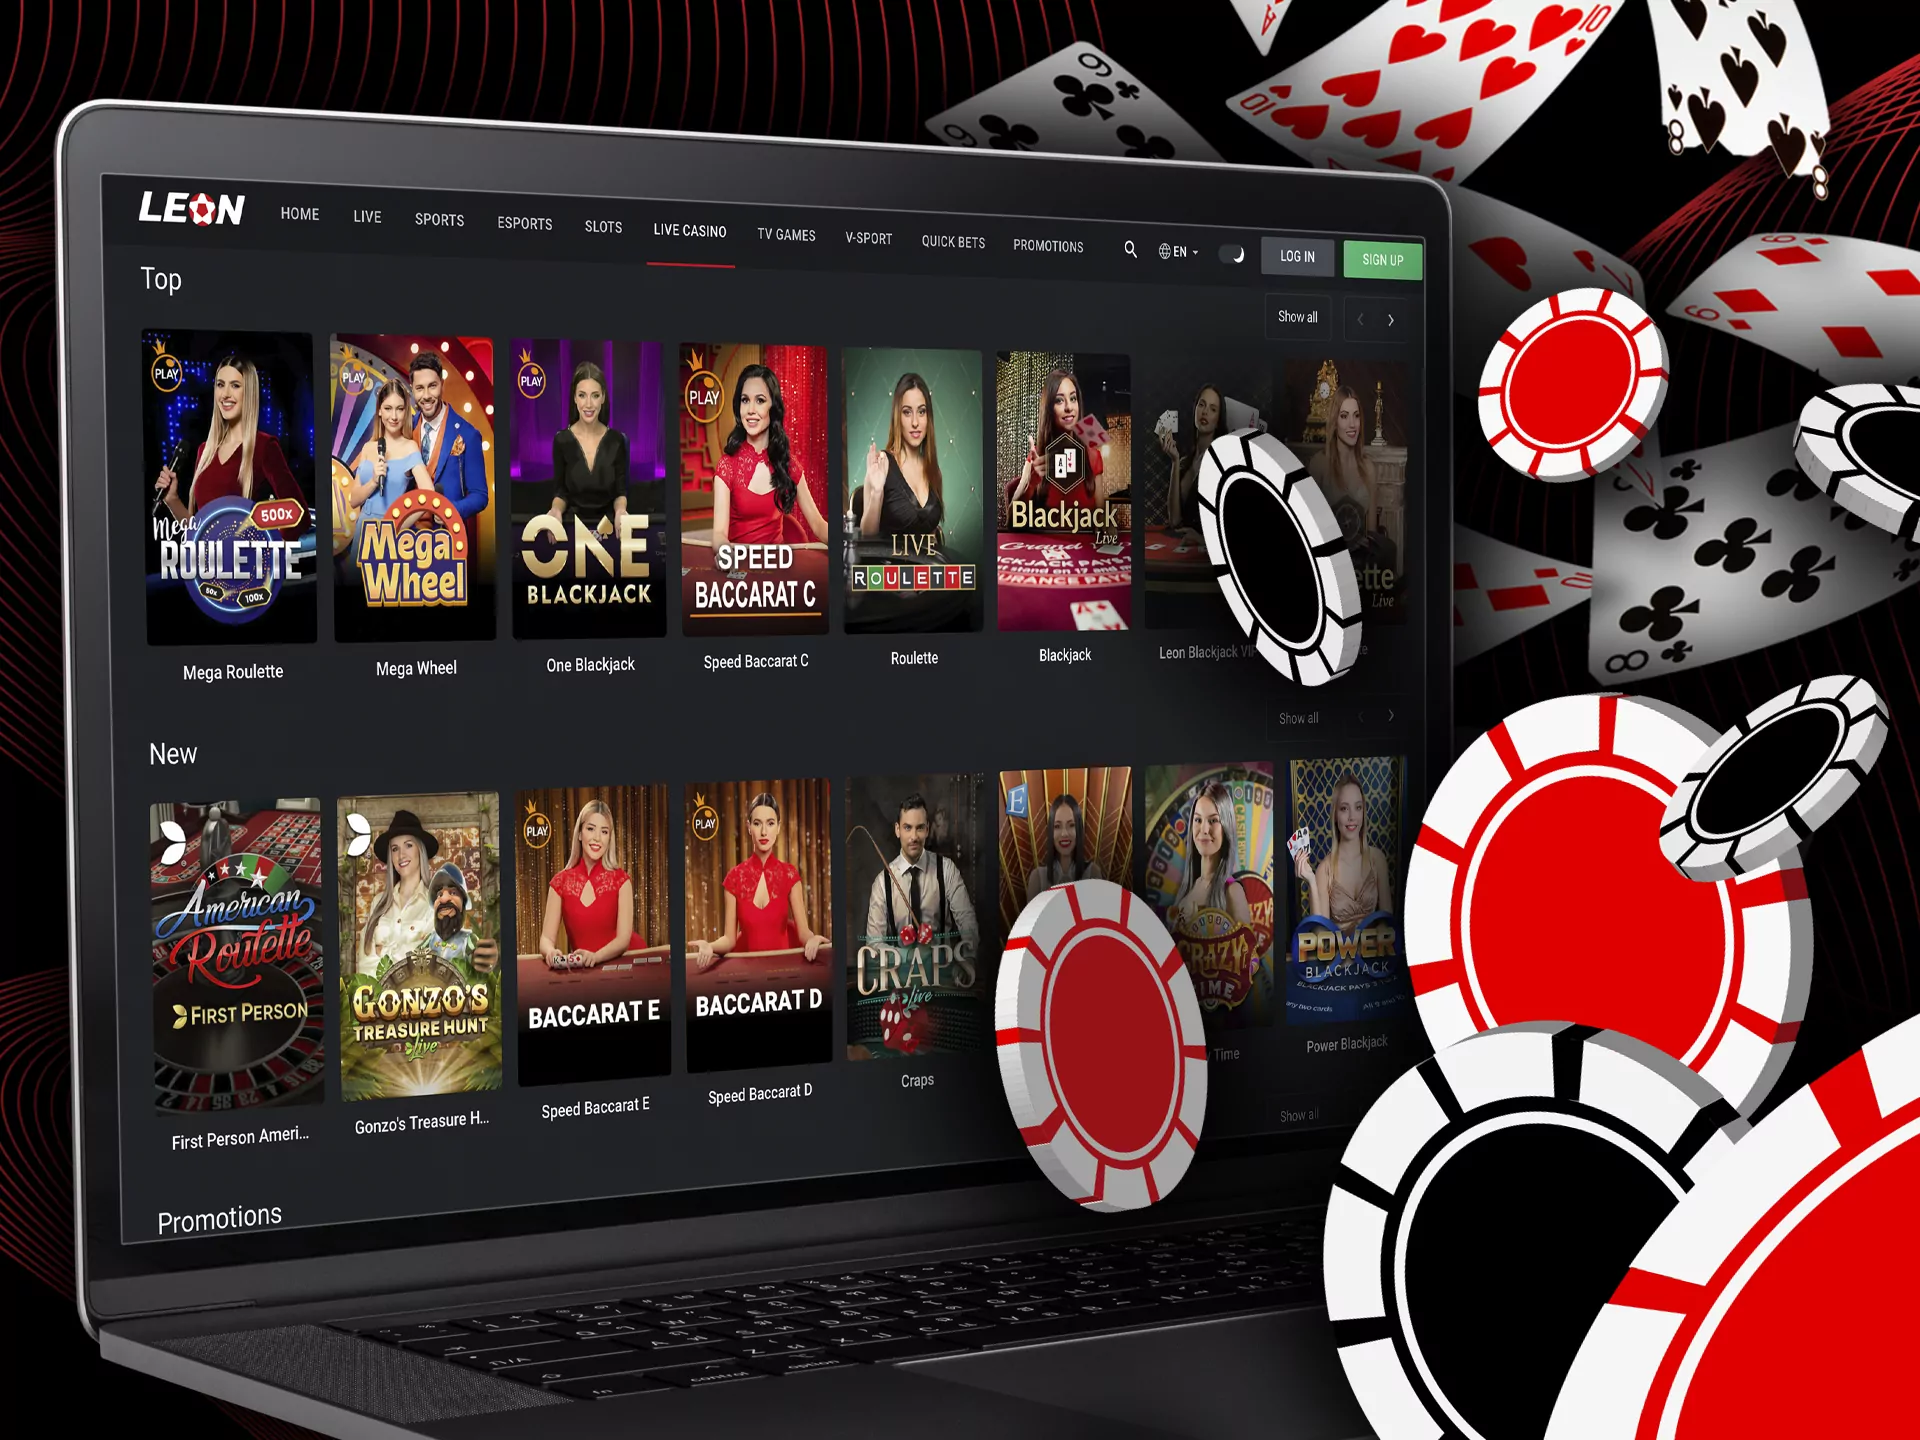 Experience the atmosphere of a real casino in the Leon's live casino section.